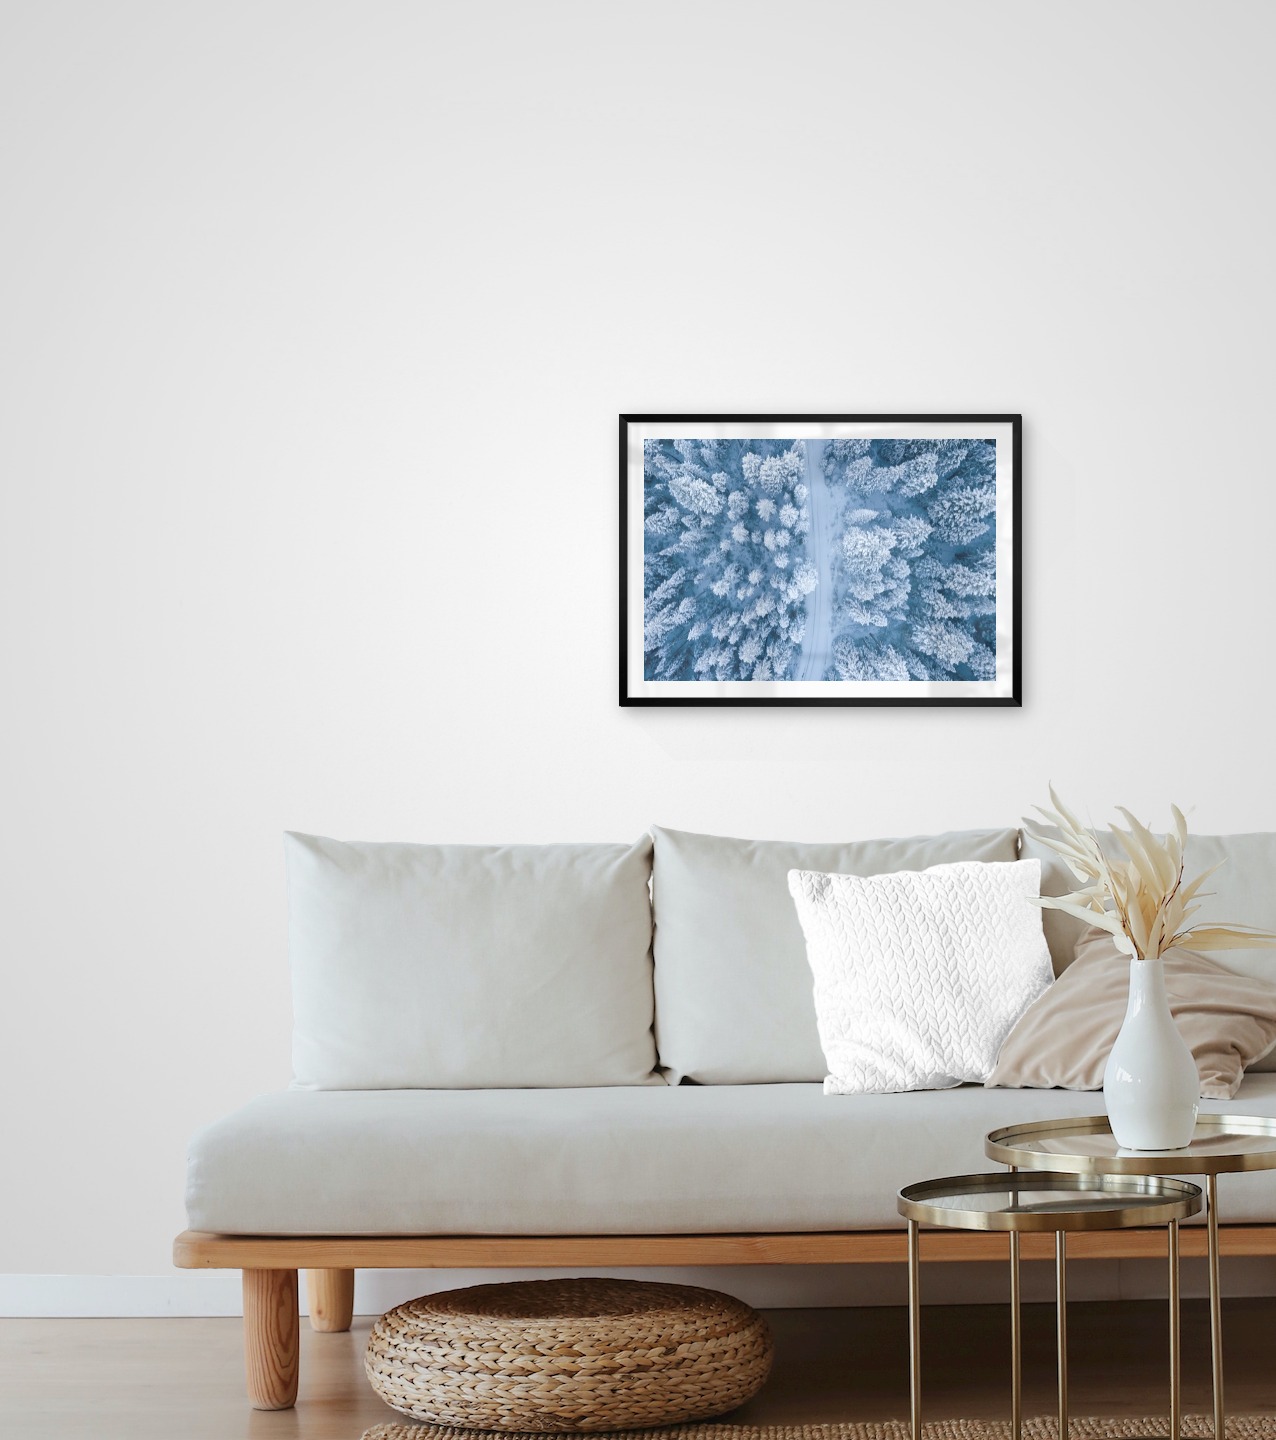 Gallery wall with picture frame in black in size 50x70 with print "Winter road from above"